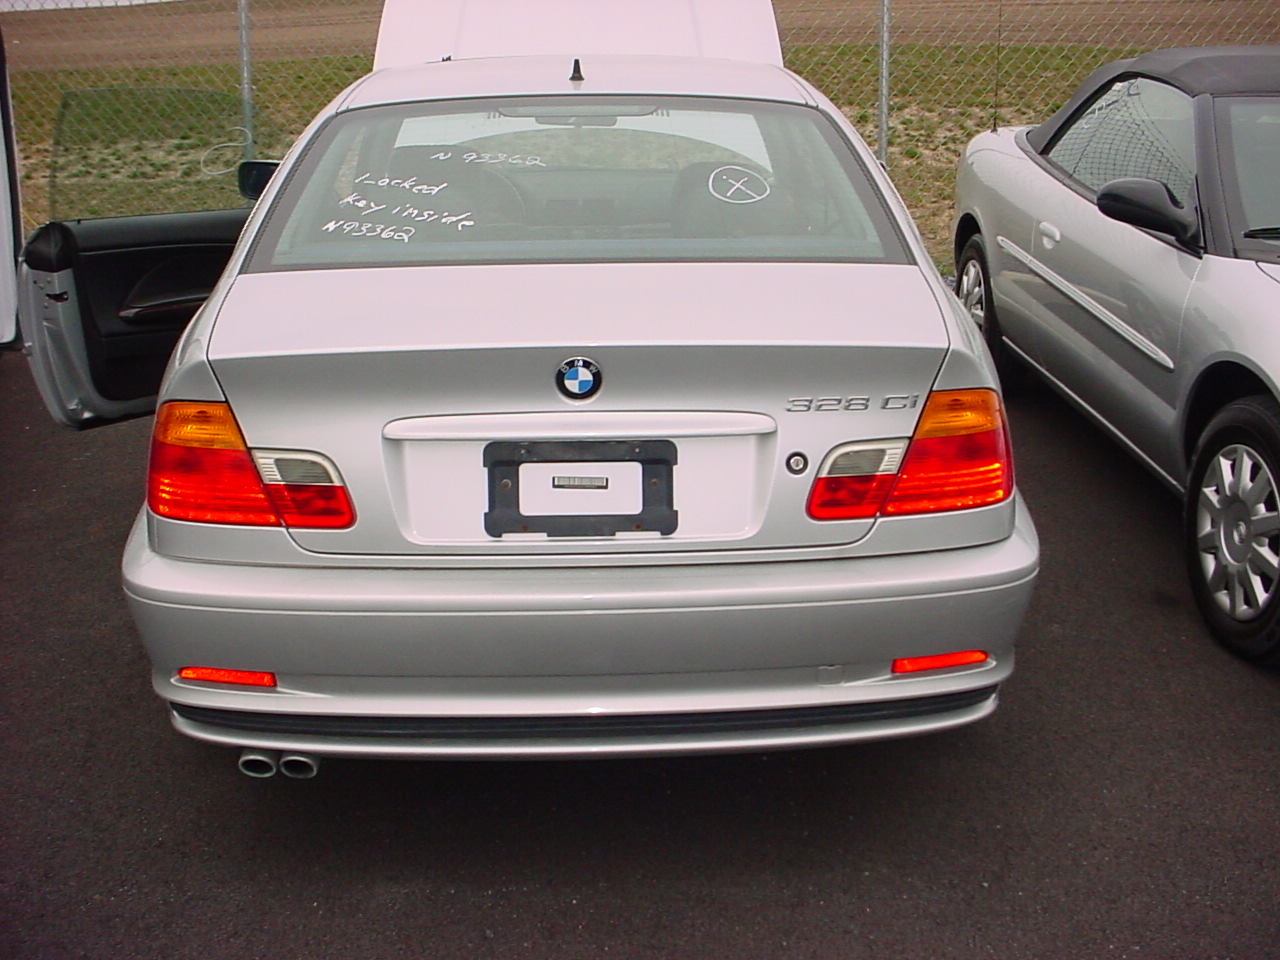 Our First BMW that we programmed a transponder key using the BMR Prog Tool